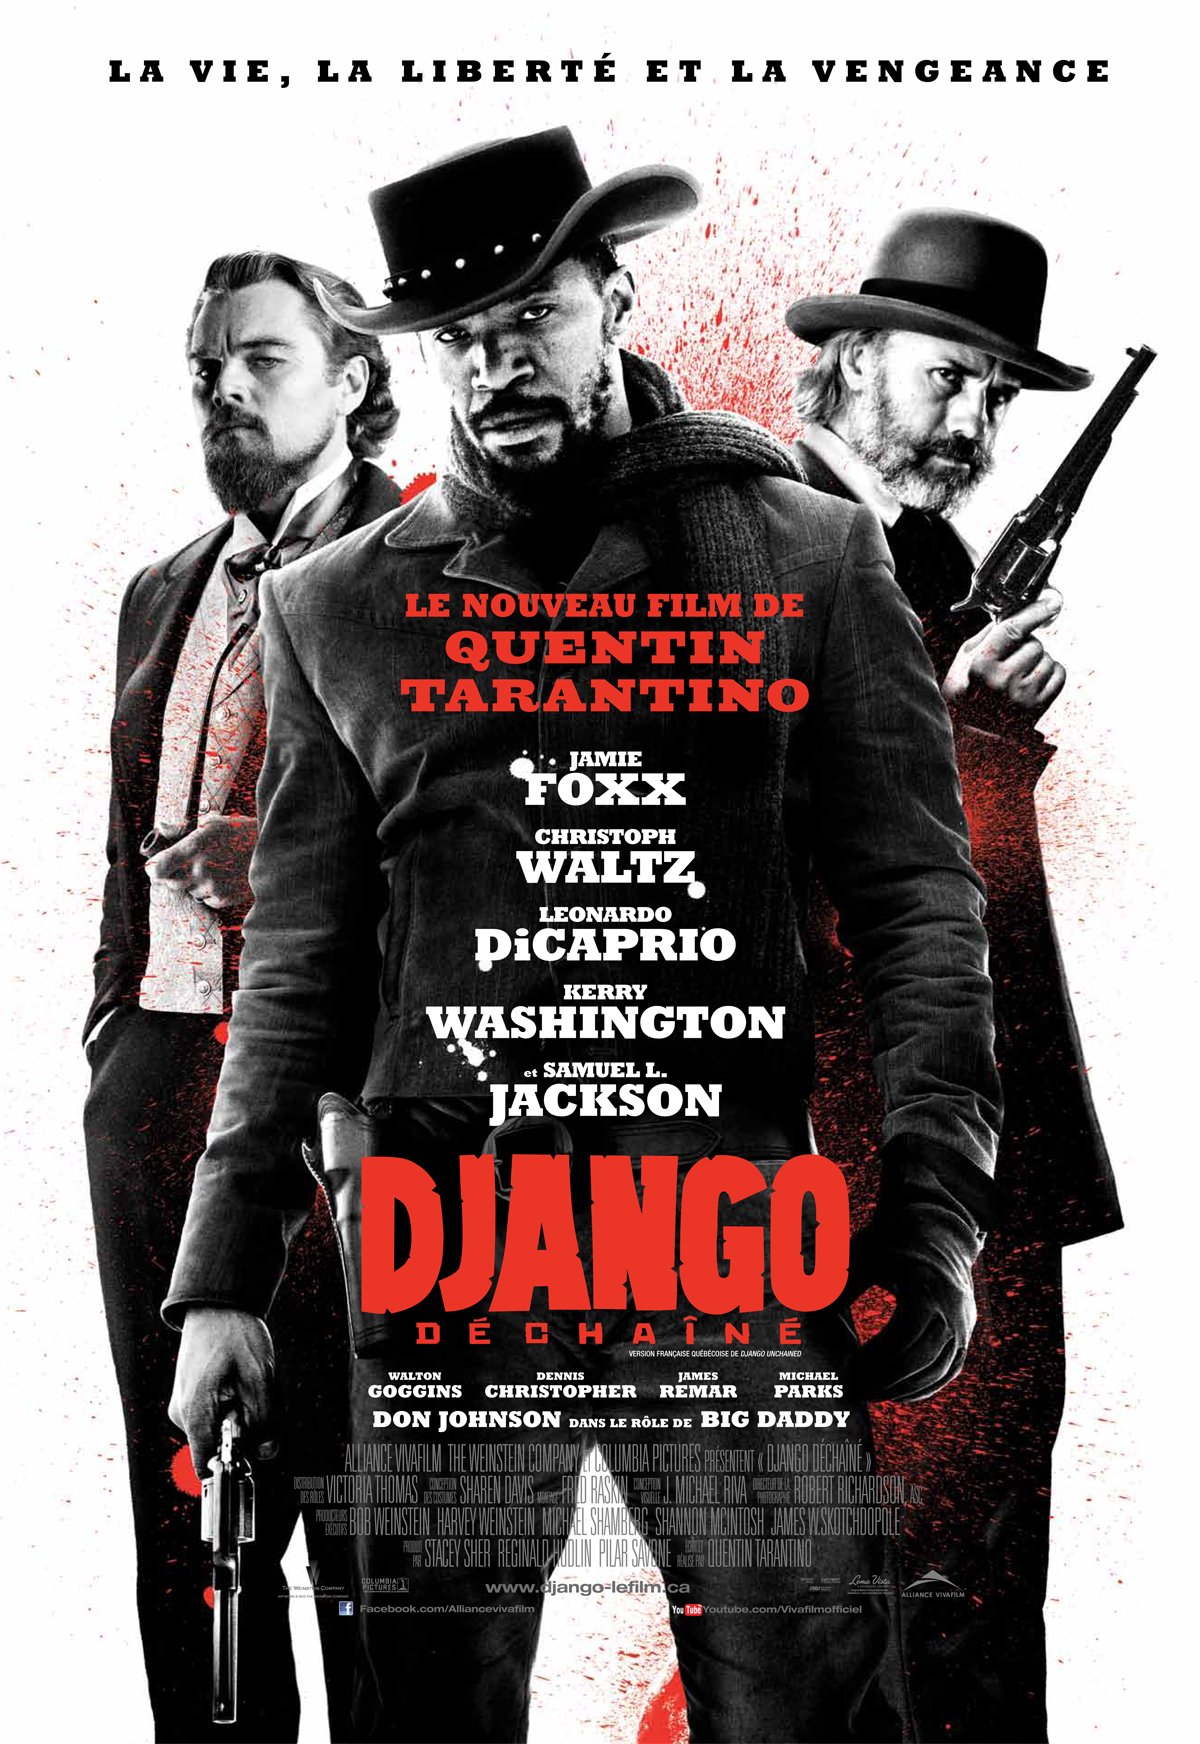 Poster of the movie Django Unchained